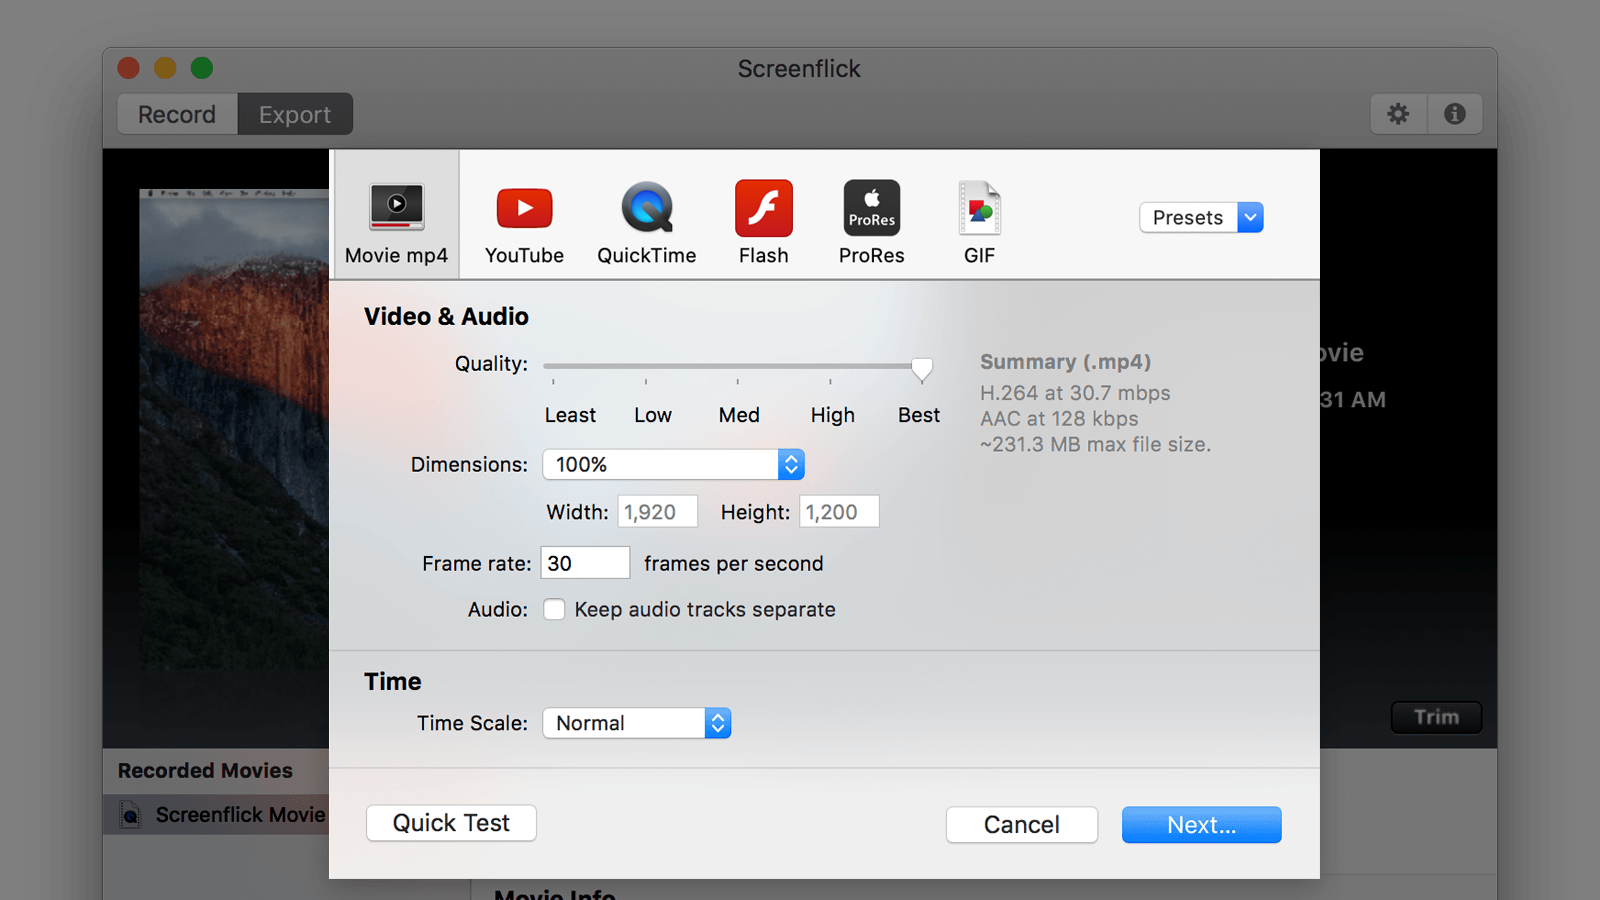 Screenflick – How to Use Screenflick on your Mac